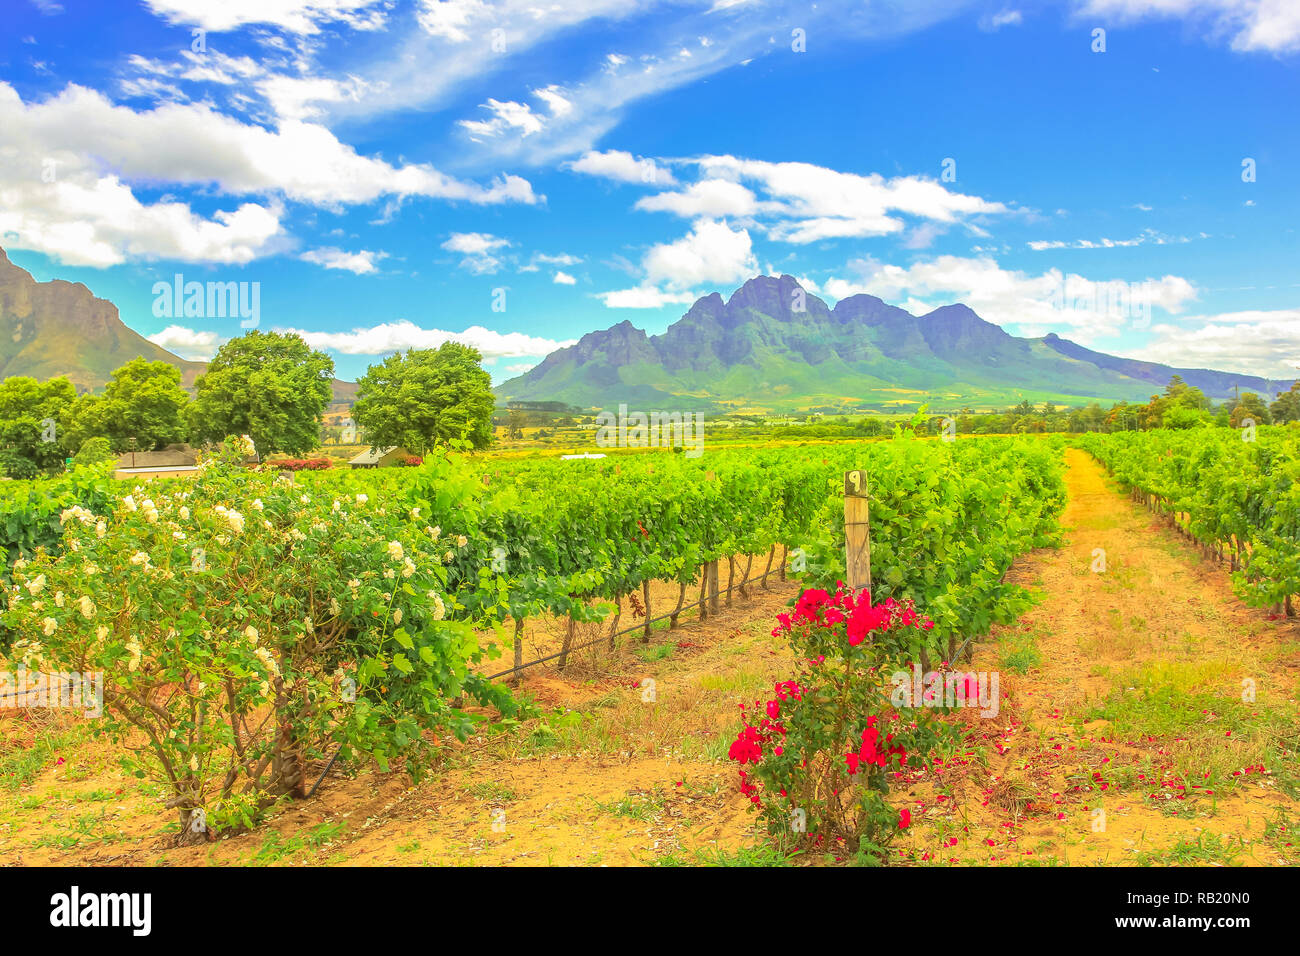 Rows of grapes in picturesque Stellenbosch, near Cape Town, wine region with Thelema Mountain on backdrop. Stellenbosch Wine Routes are one of most popular attractions of South Africa. Summer season. Stock Photo